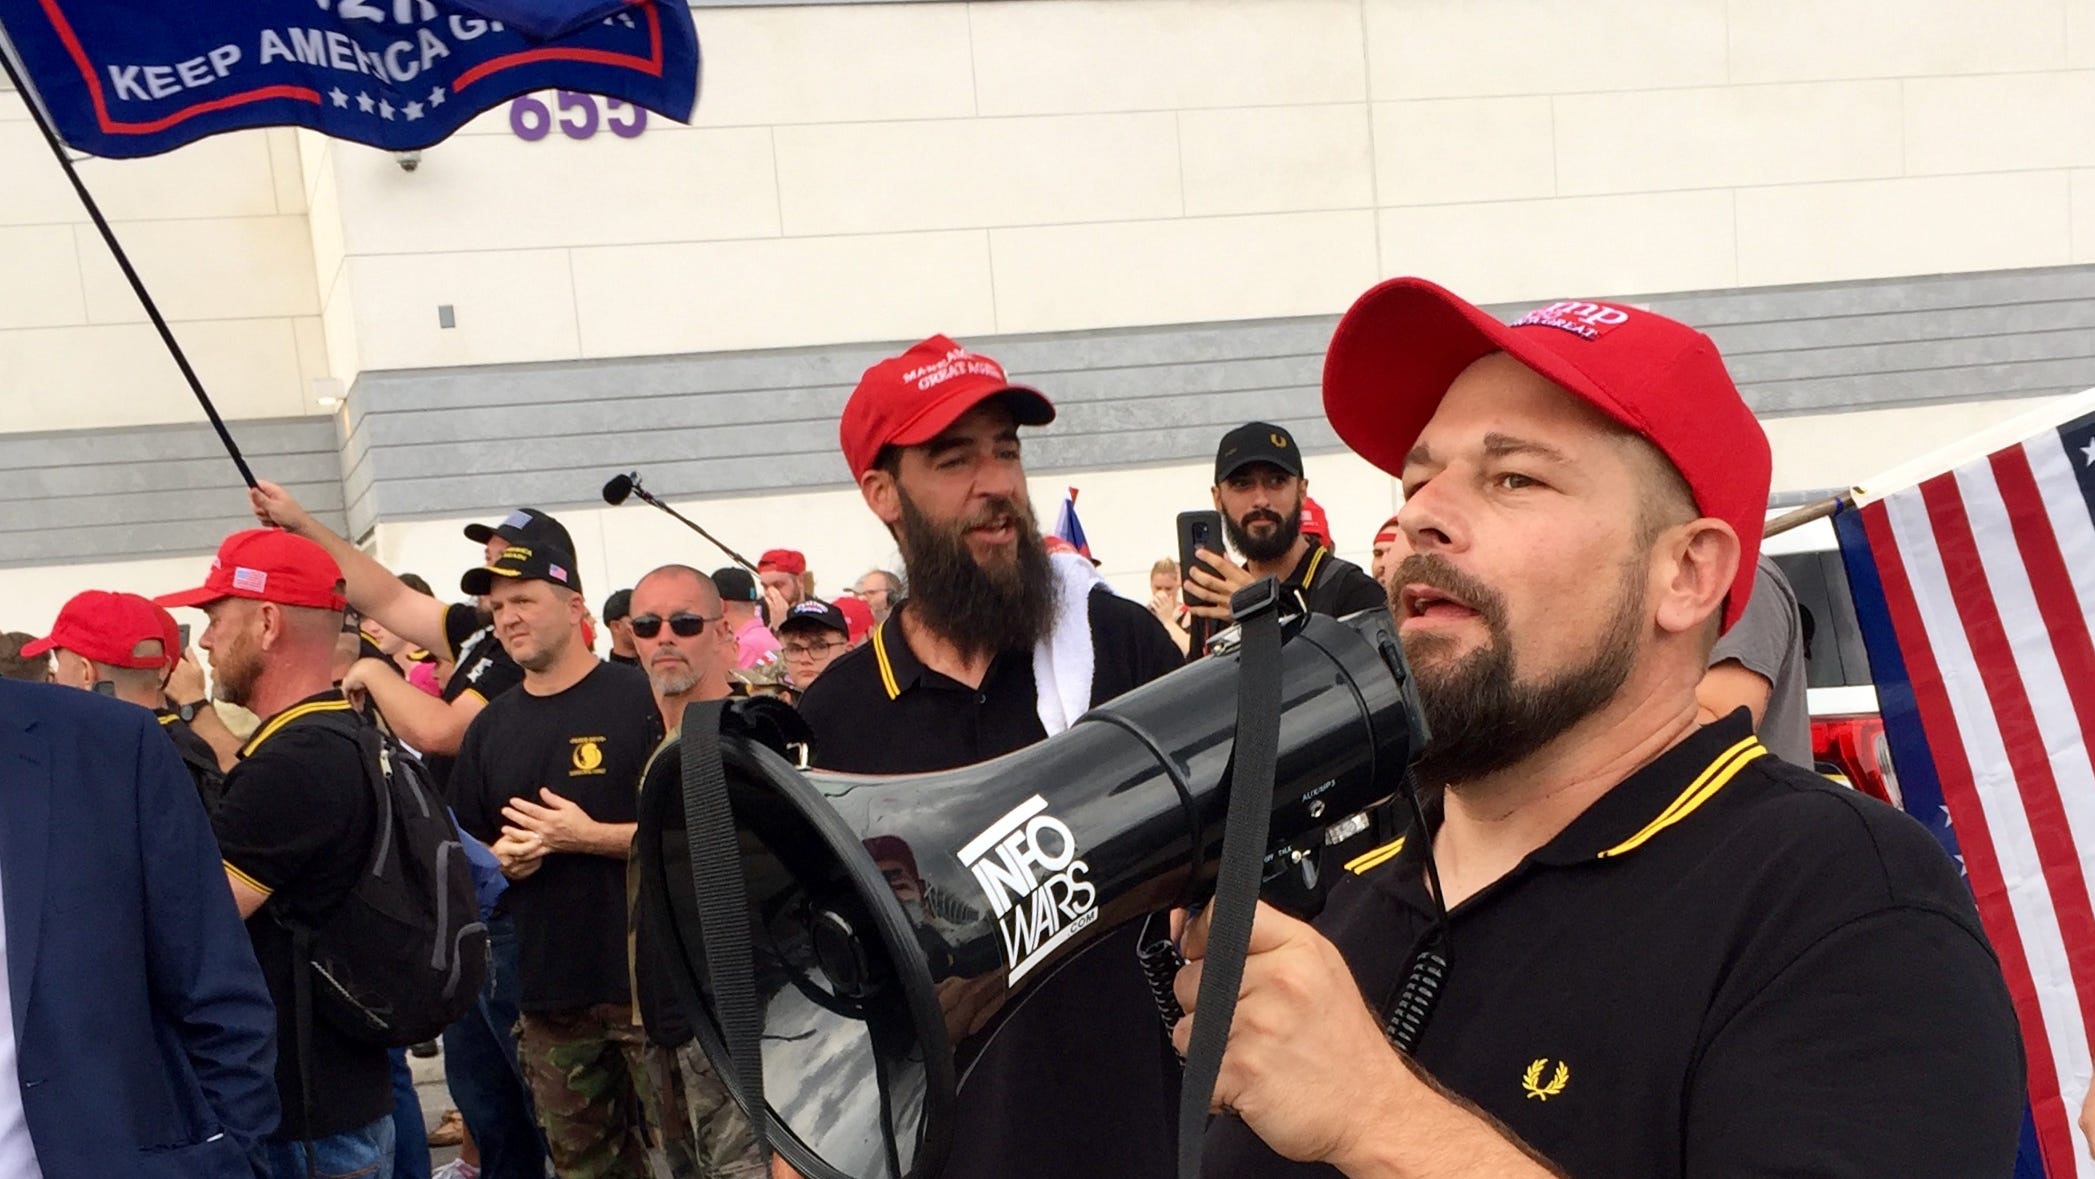 Trump Opens Door For Proud Boys Far Right Group To Enter Election Fray proud boys at trump lgbtq counter rally in orlando june 18 2019